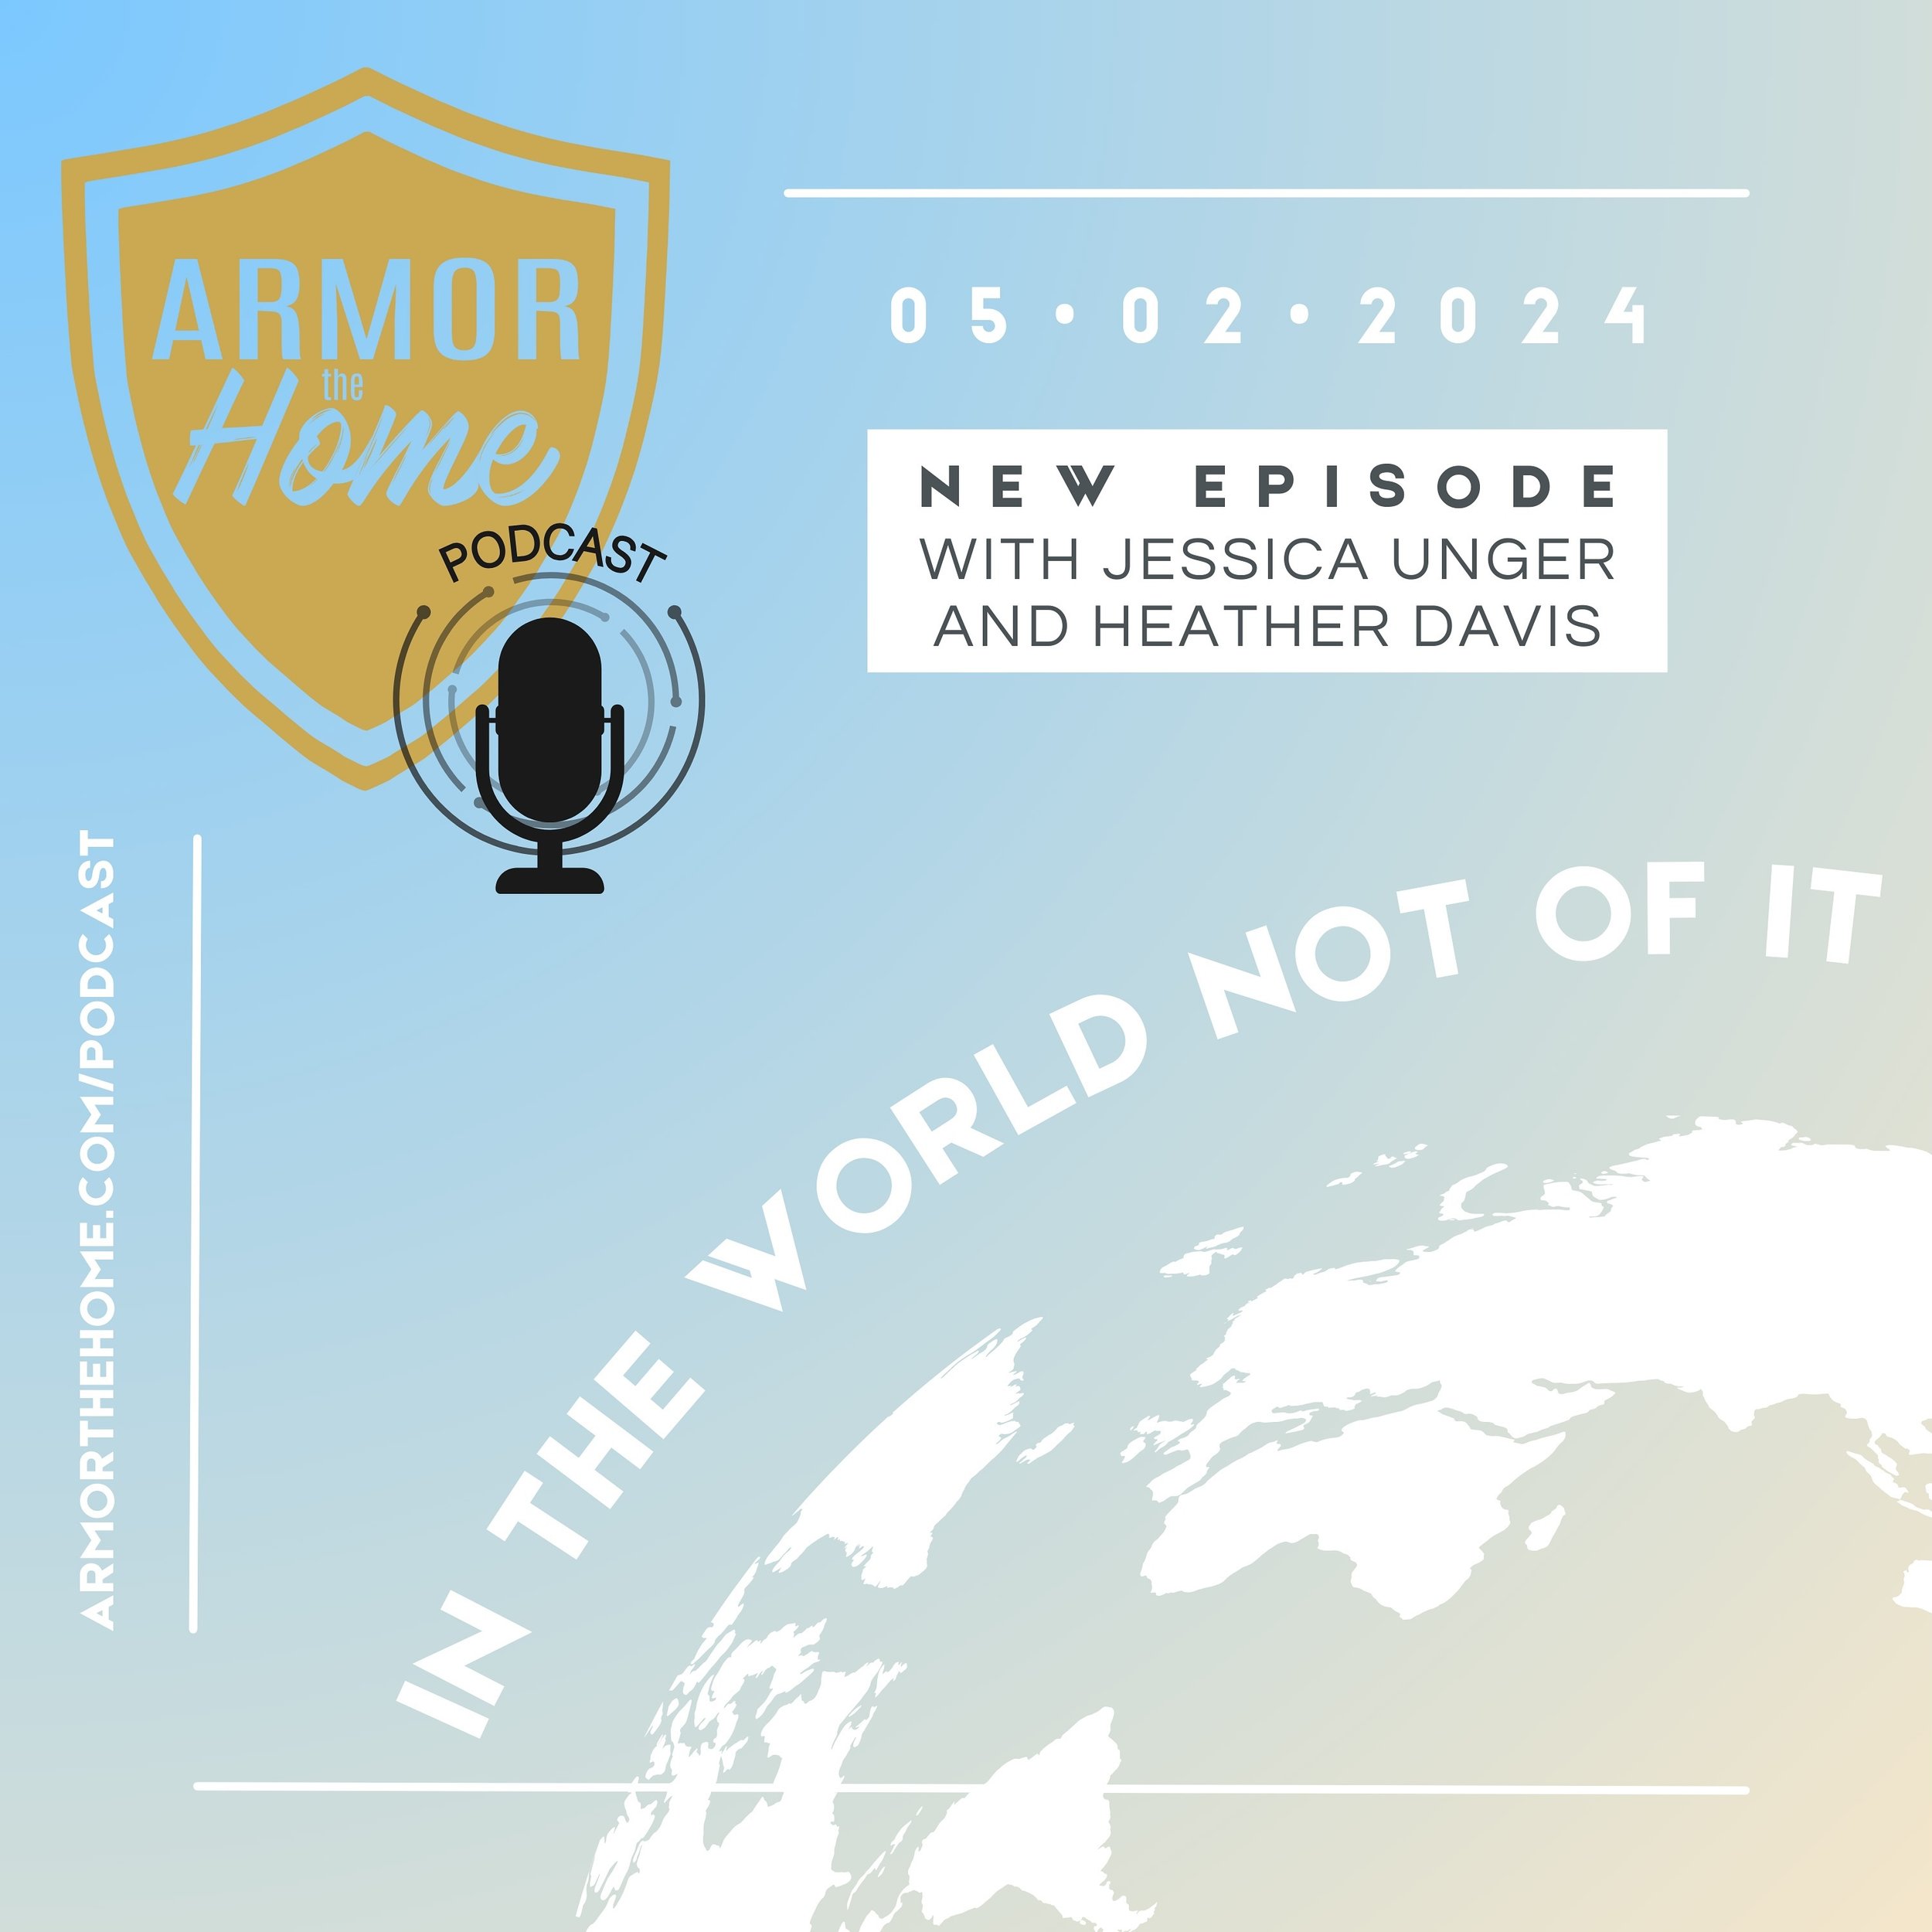 🎙️Listen in as Jess and Heather start to catch up with each other after a fun spring break and end up diving right into a candid conversation on what God has been teaching them about belonging to the Kingdom of Heaven and choosing a consecrated life